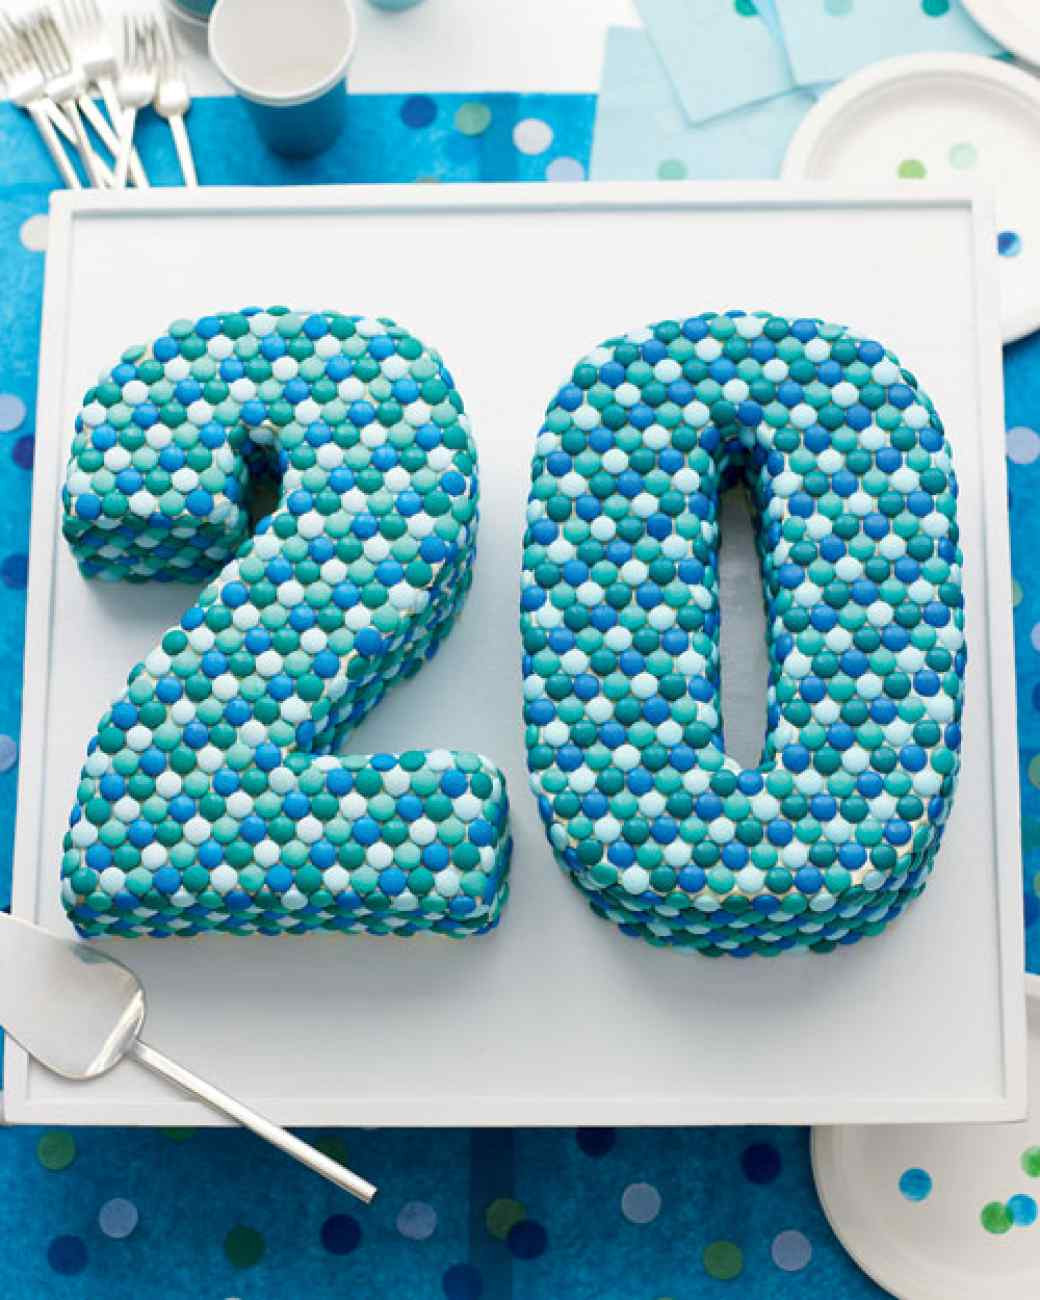 Number Birthday Cakes
 "Who s Counting " Birthday Cake Recipe